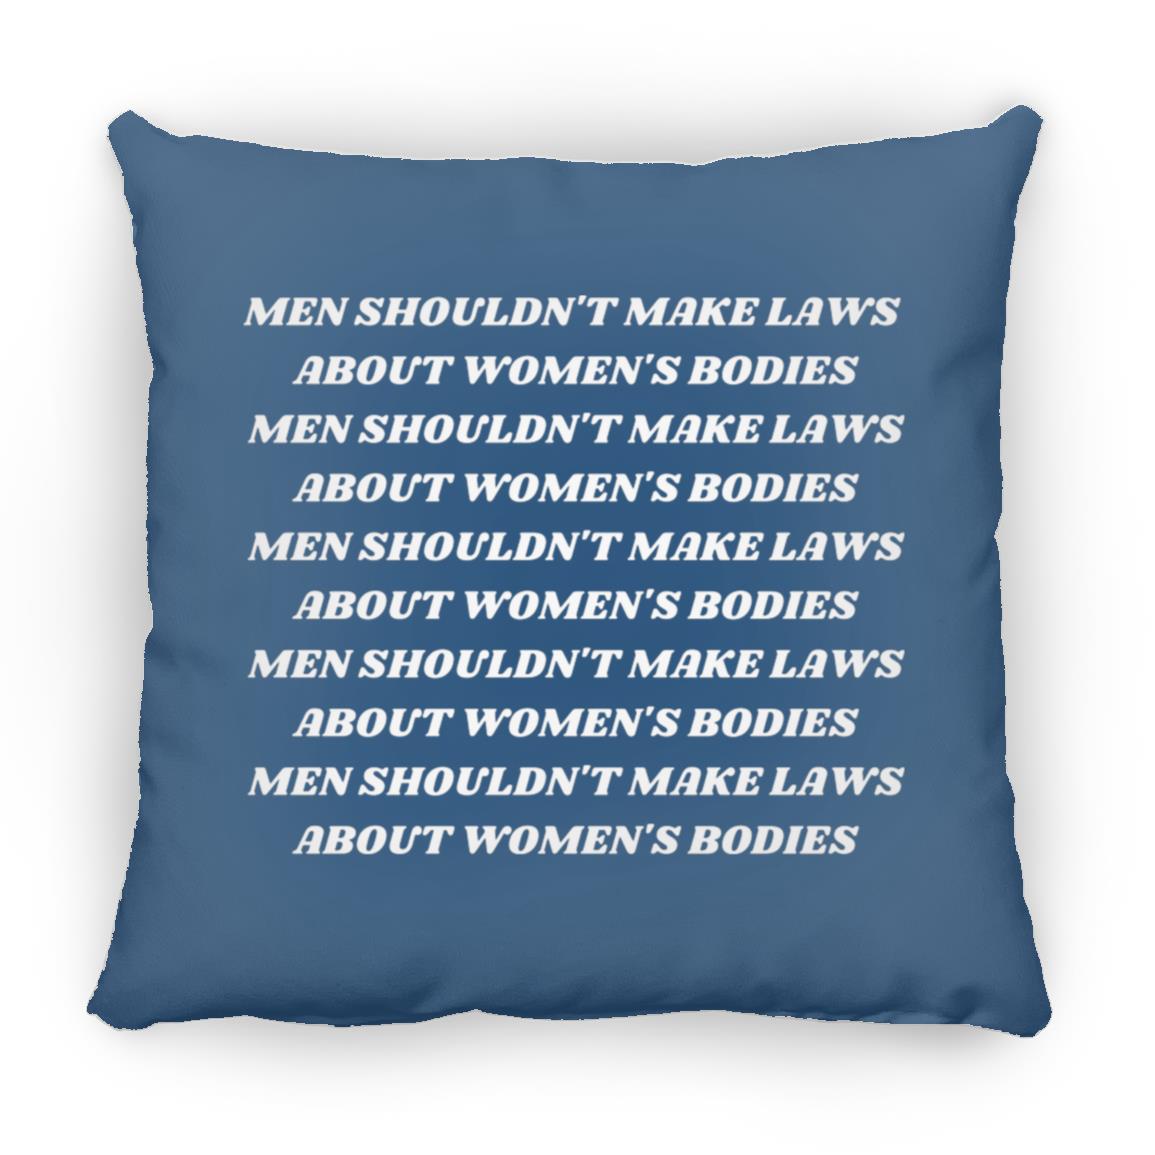 Men Shouldn't Make Laws About Women's Bodies Throw Pillow